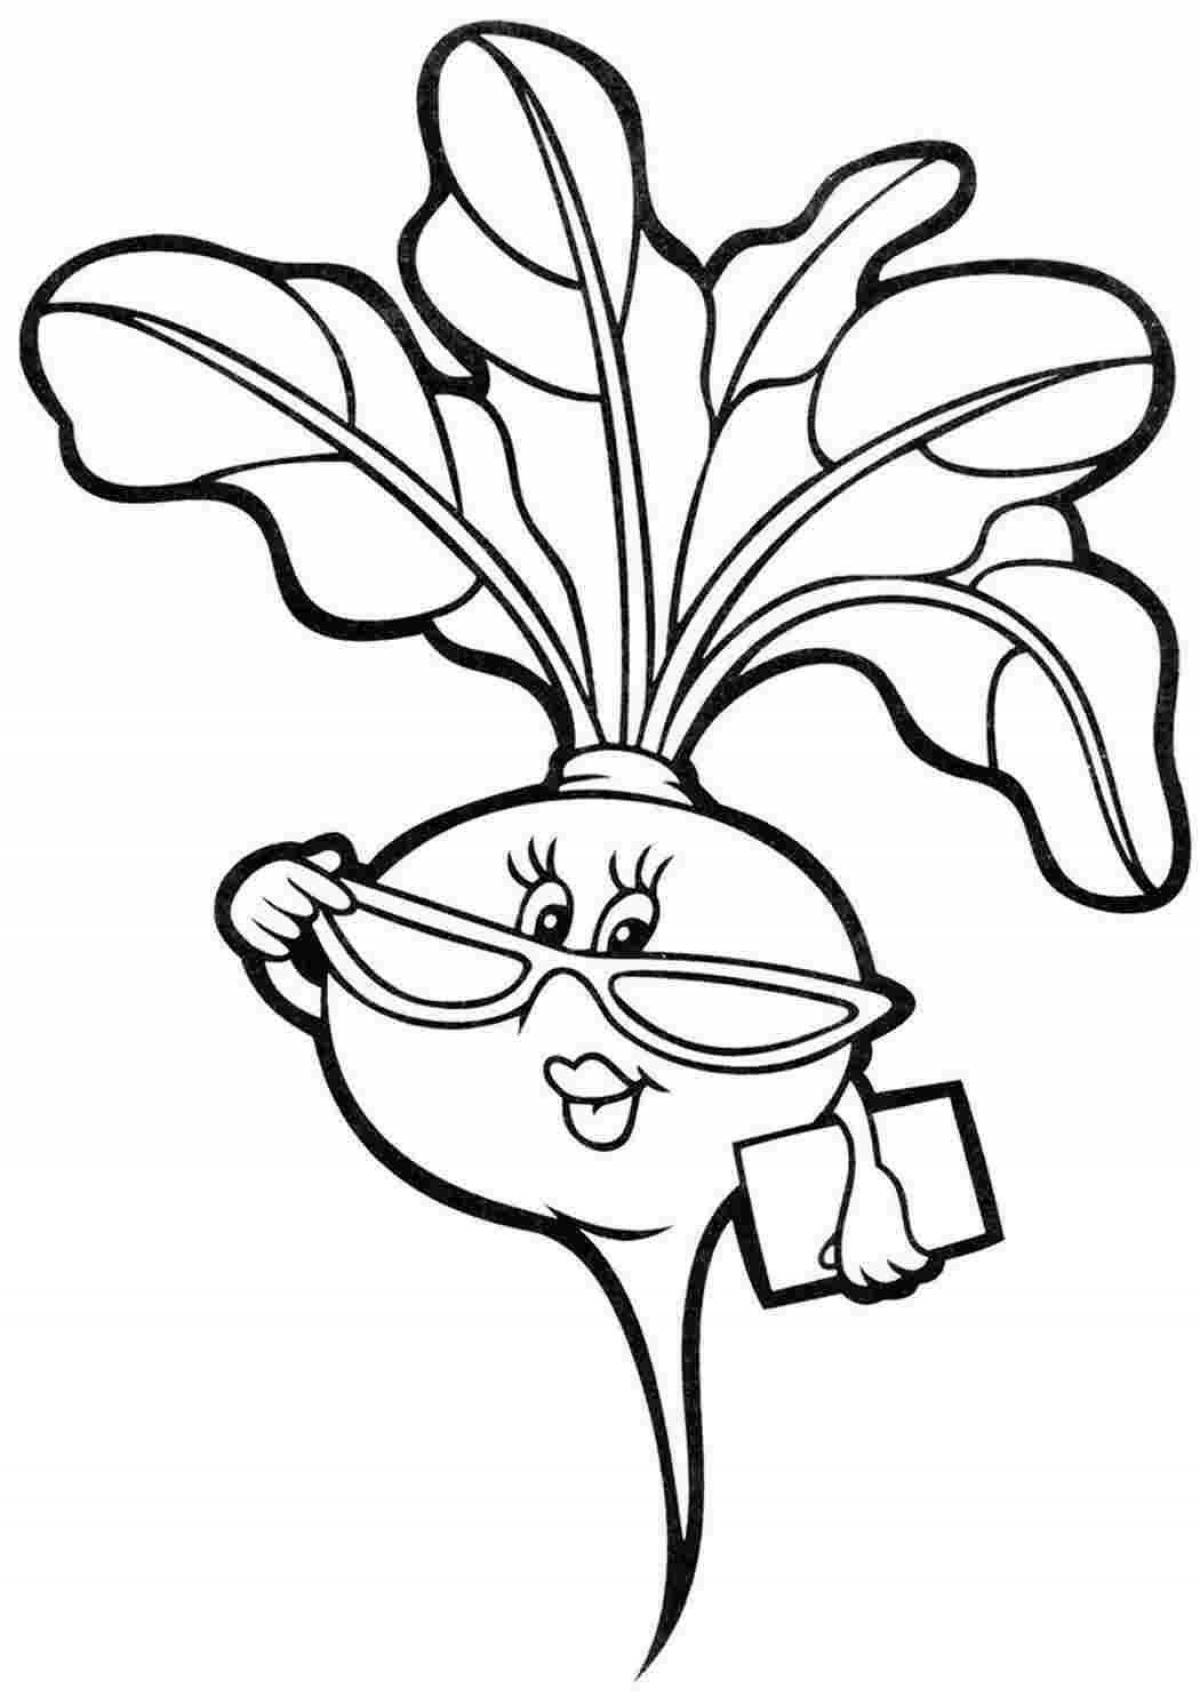 Amazing beetroot coloring page for kids